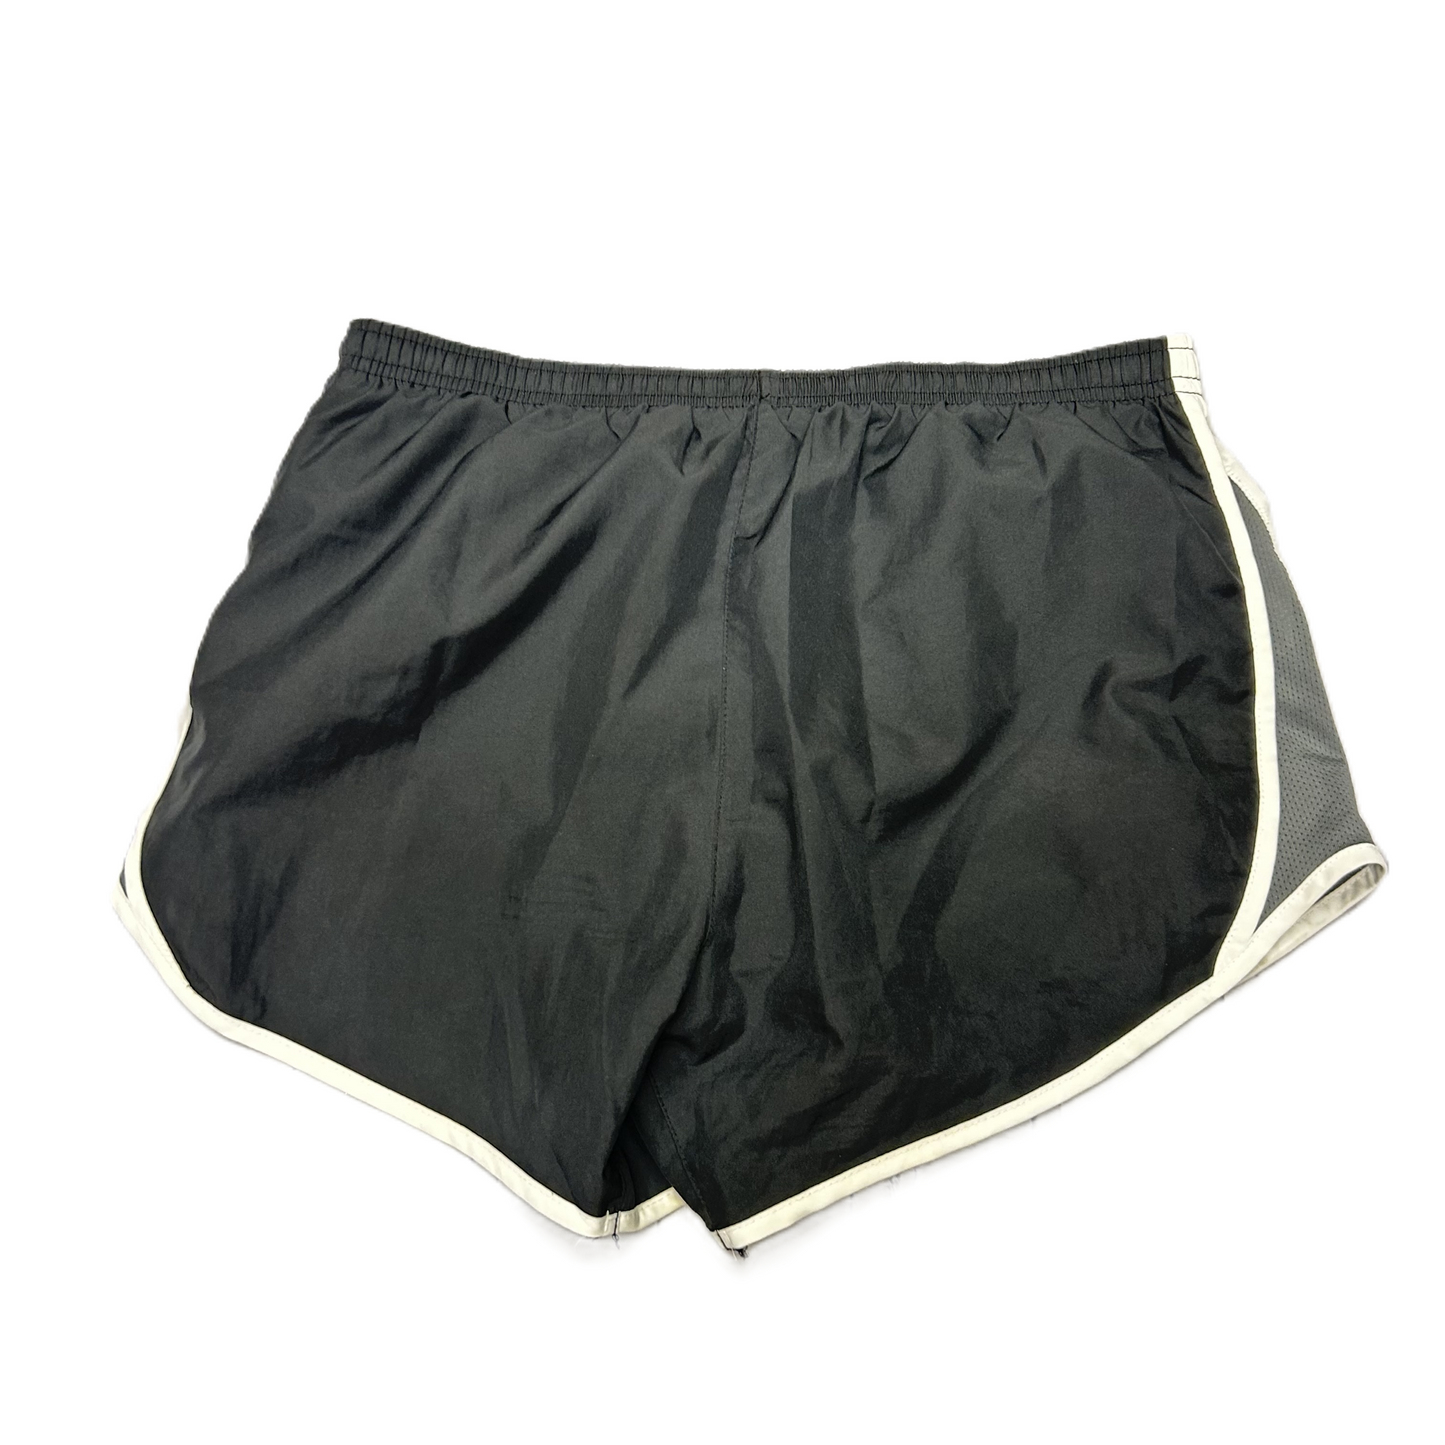 Black Athletic Shorts By Nike, Size: S